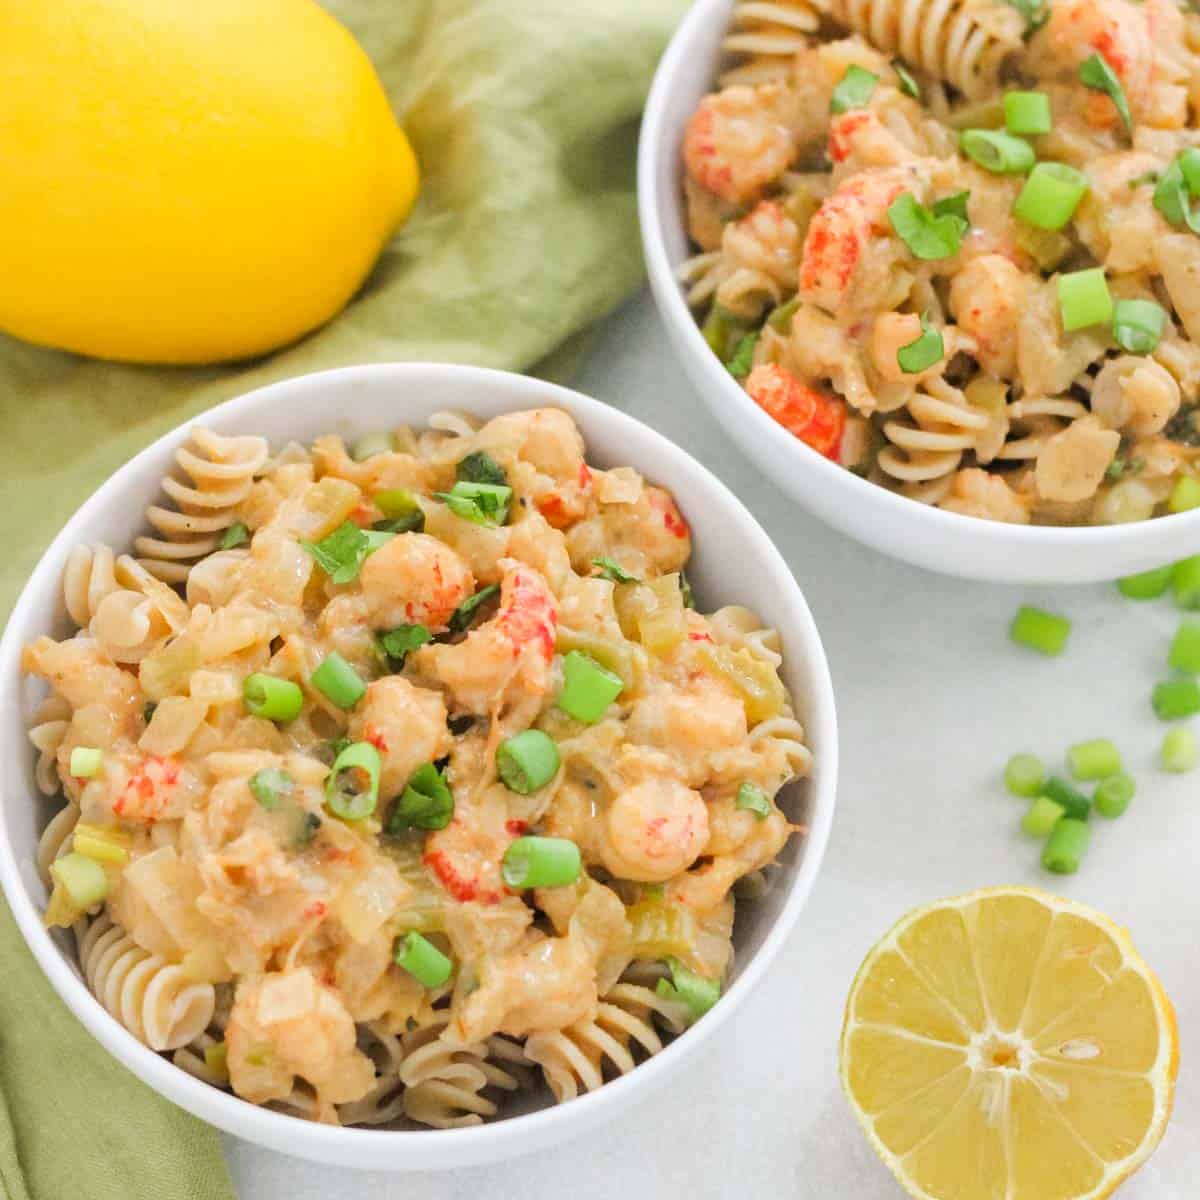 two bowls of rotini topped with crawfish Monica sauce next to lemons, green onions, and a green napkin.